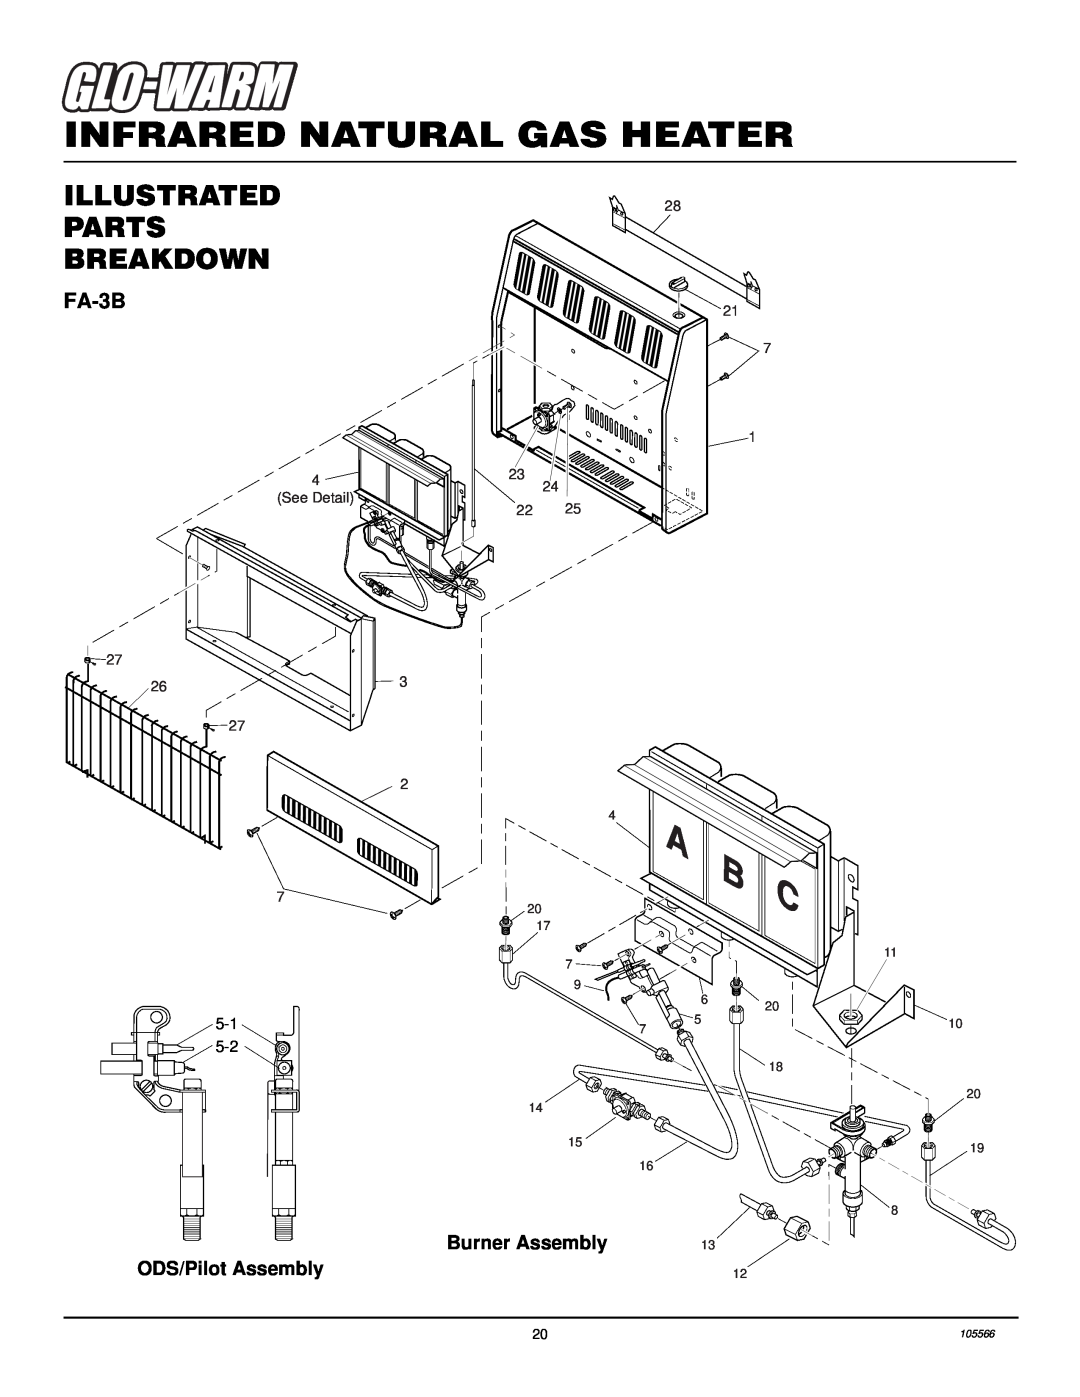 Desa FA-5B Illustrated Parts Breakdown, FA-3B, Burner Assembly, ODS/Pilot Assembly, Infrared Natural Gas Heater, 4 20 